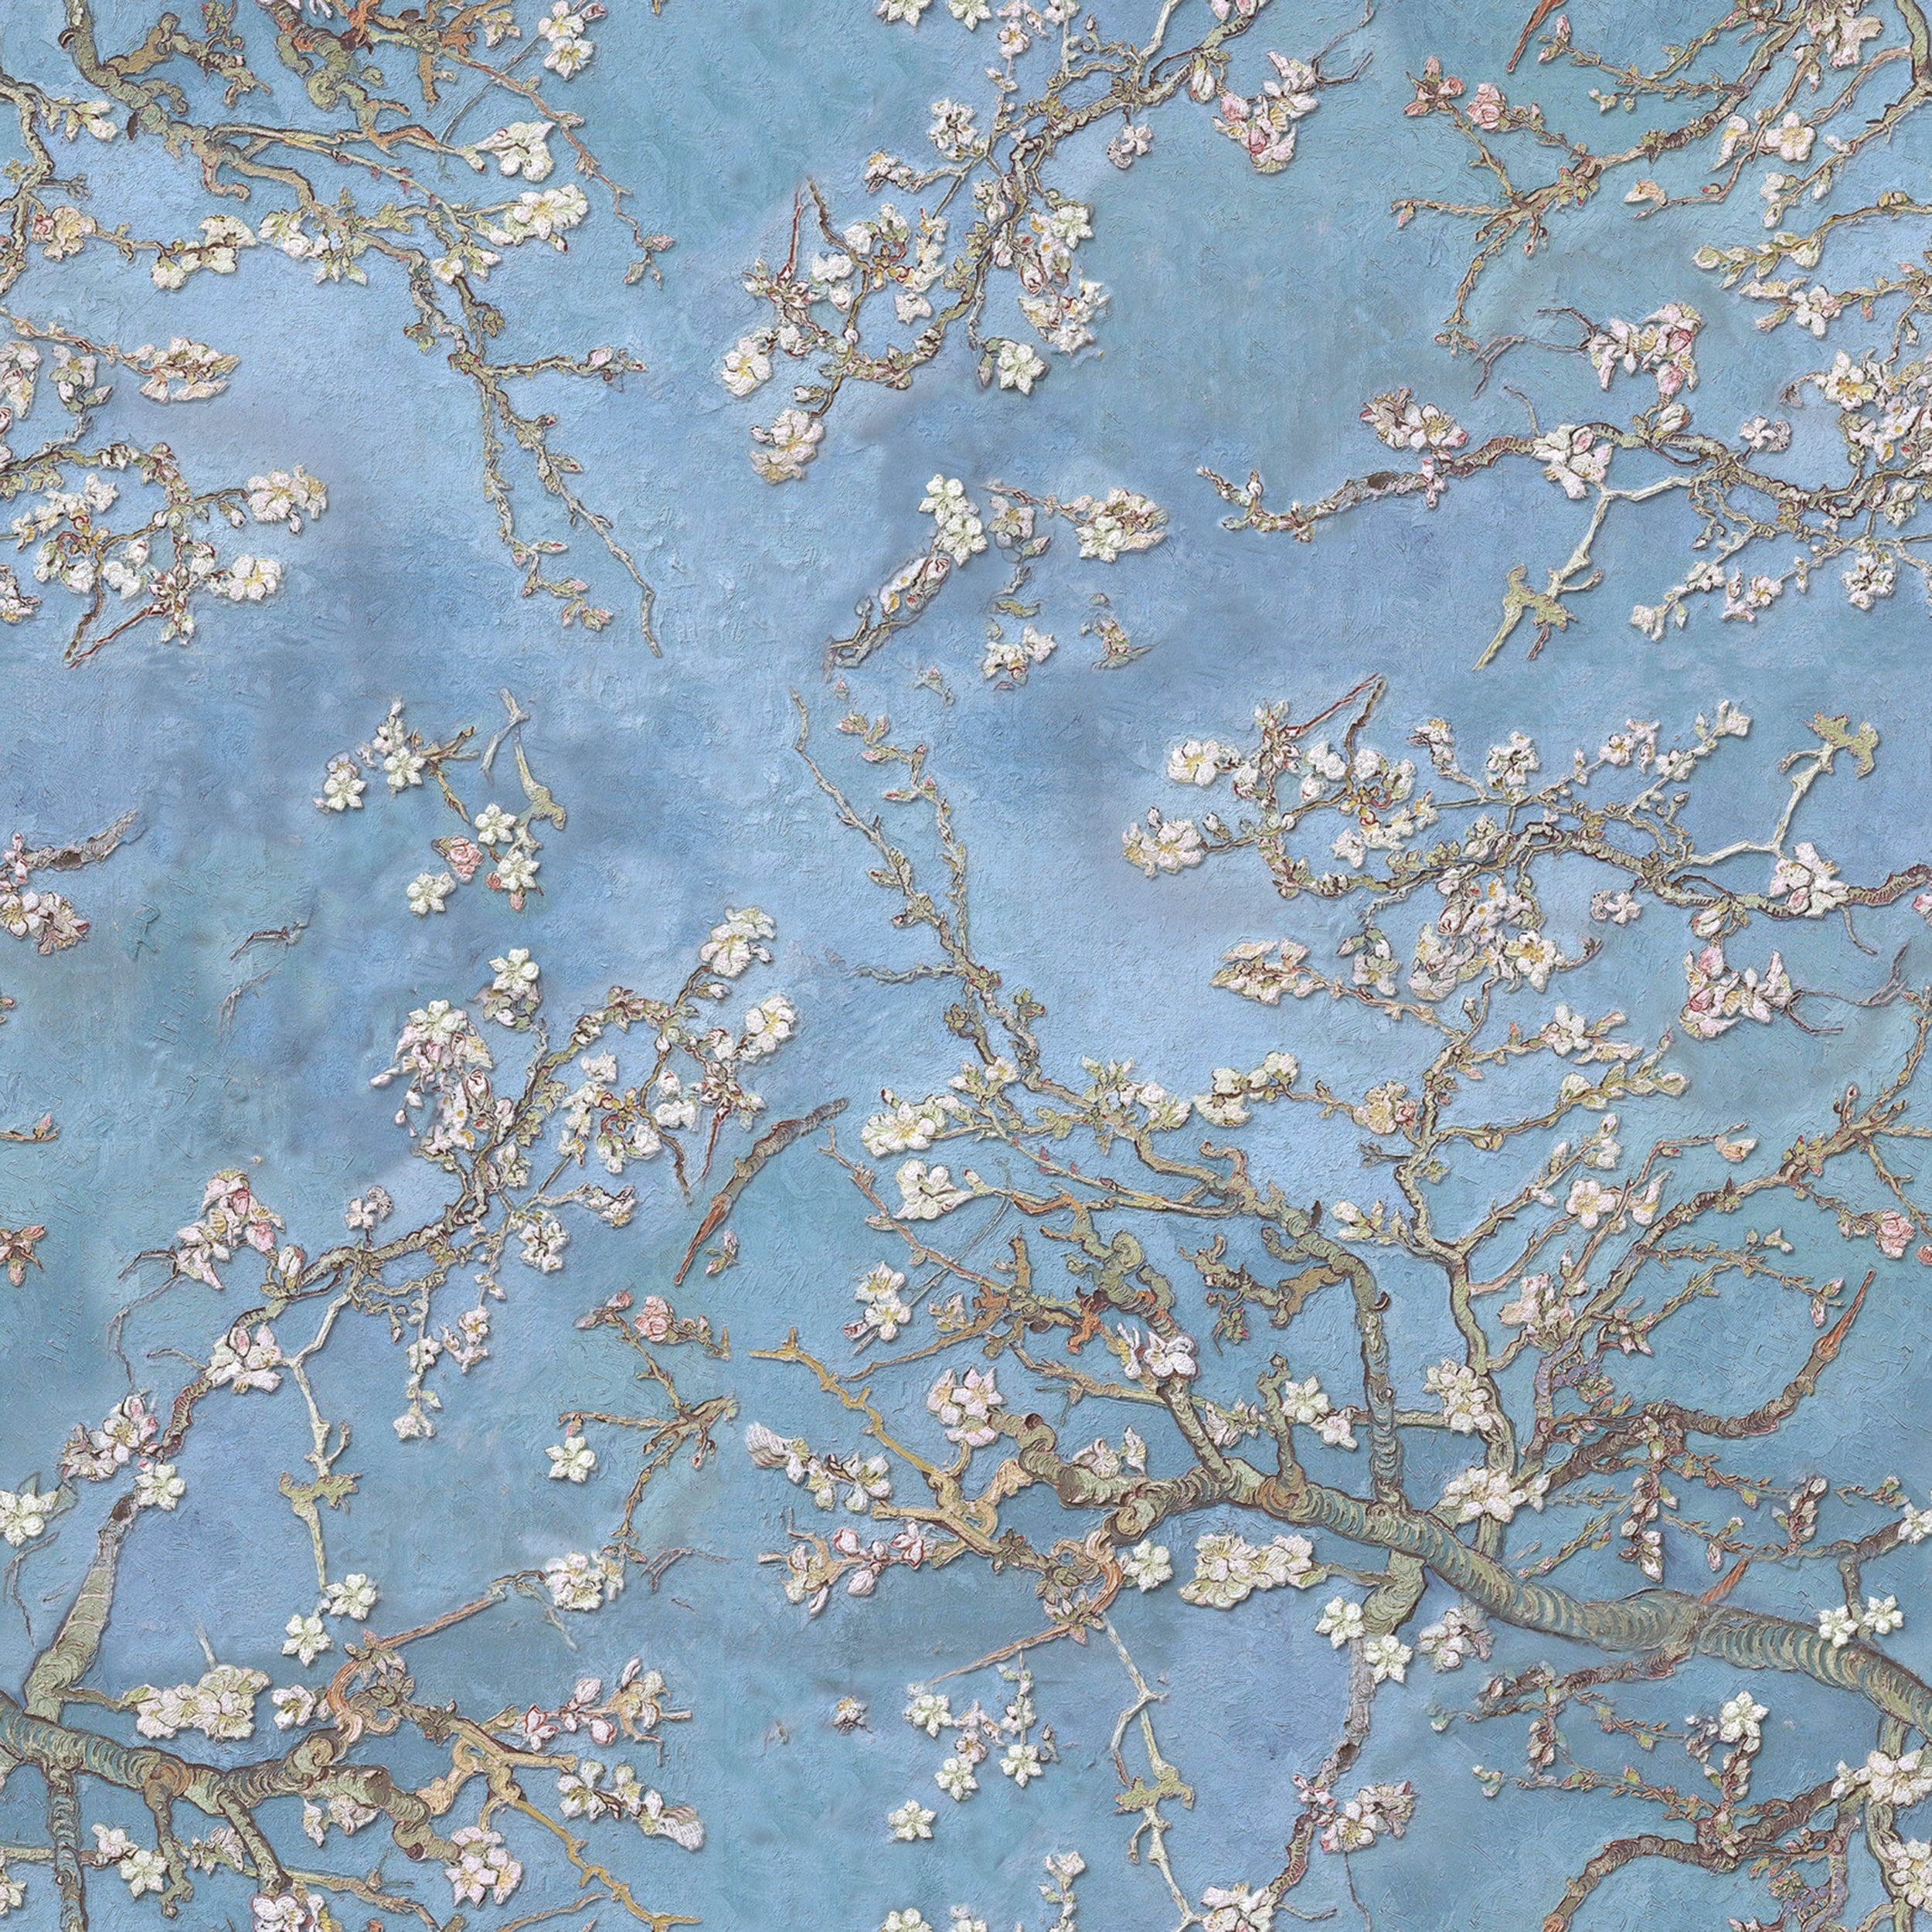 Floral Almond Blossom Voyage Removable Wallpaper'' inch x 10'ft